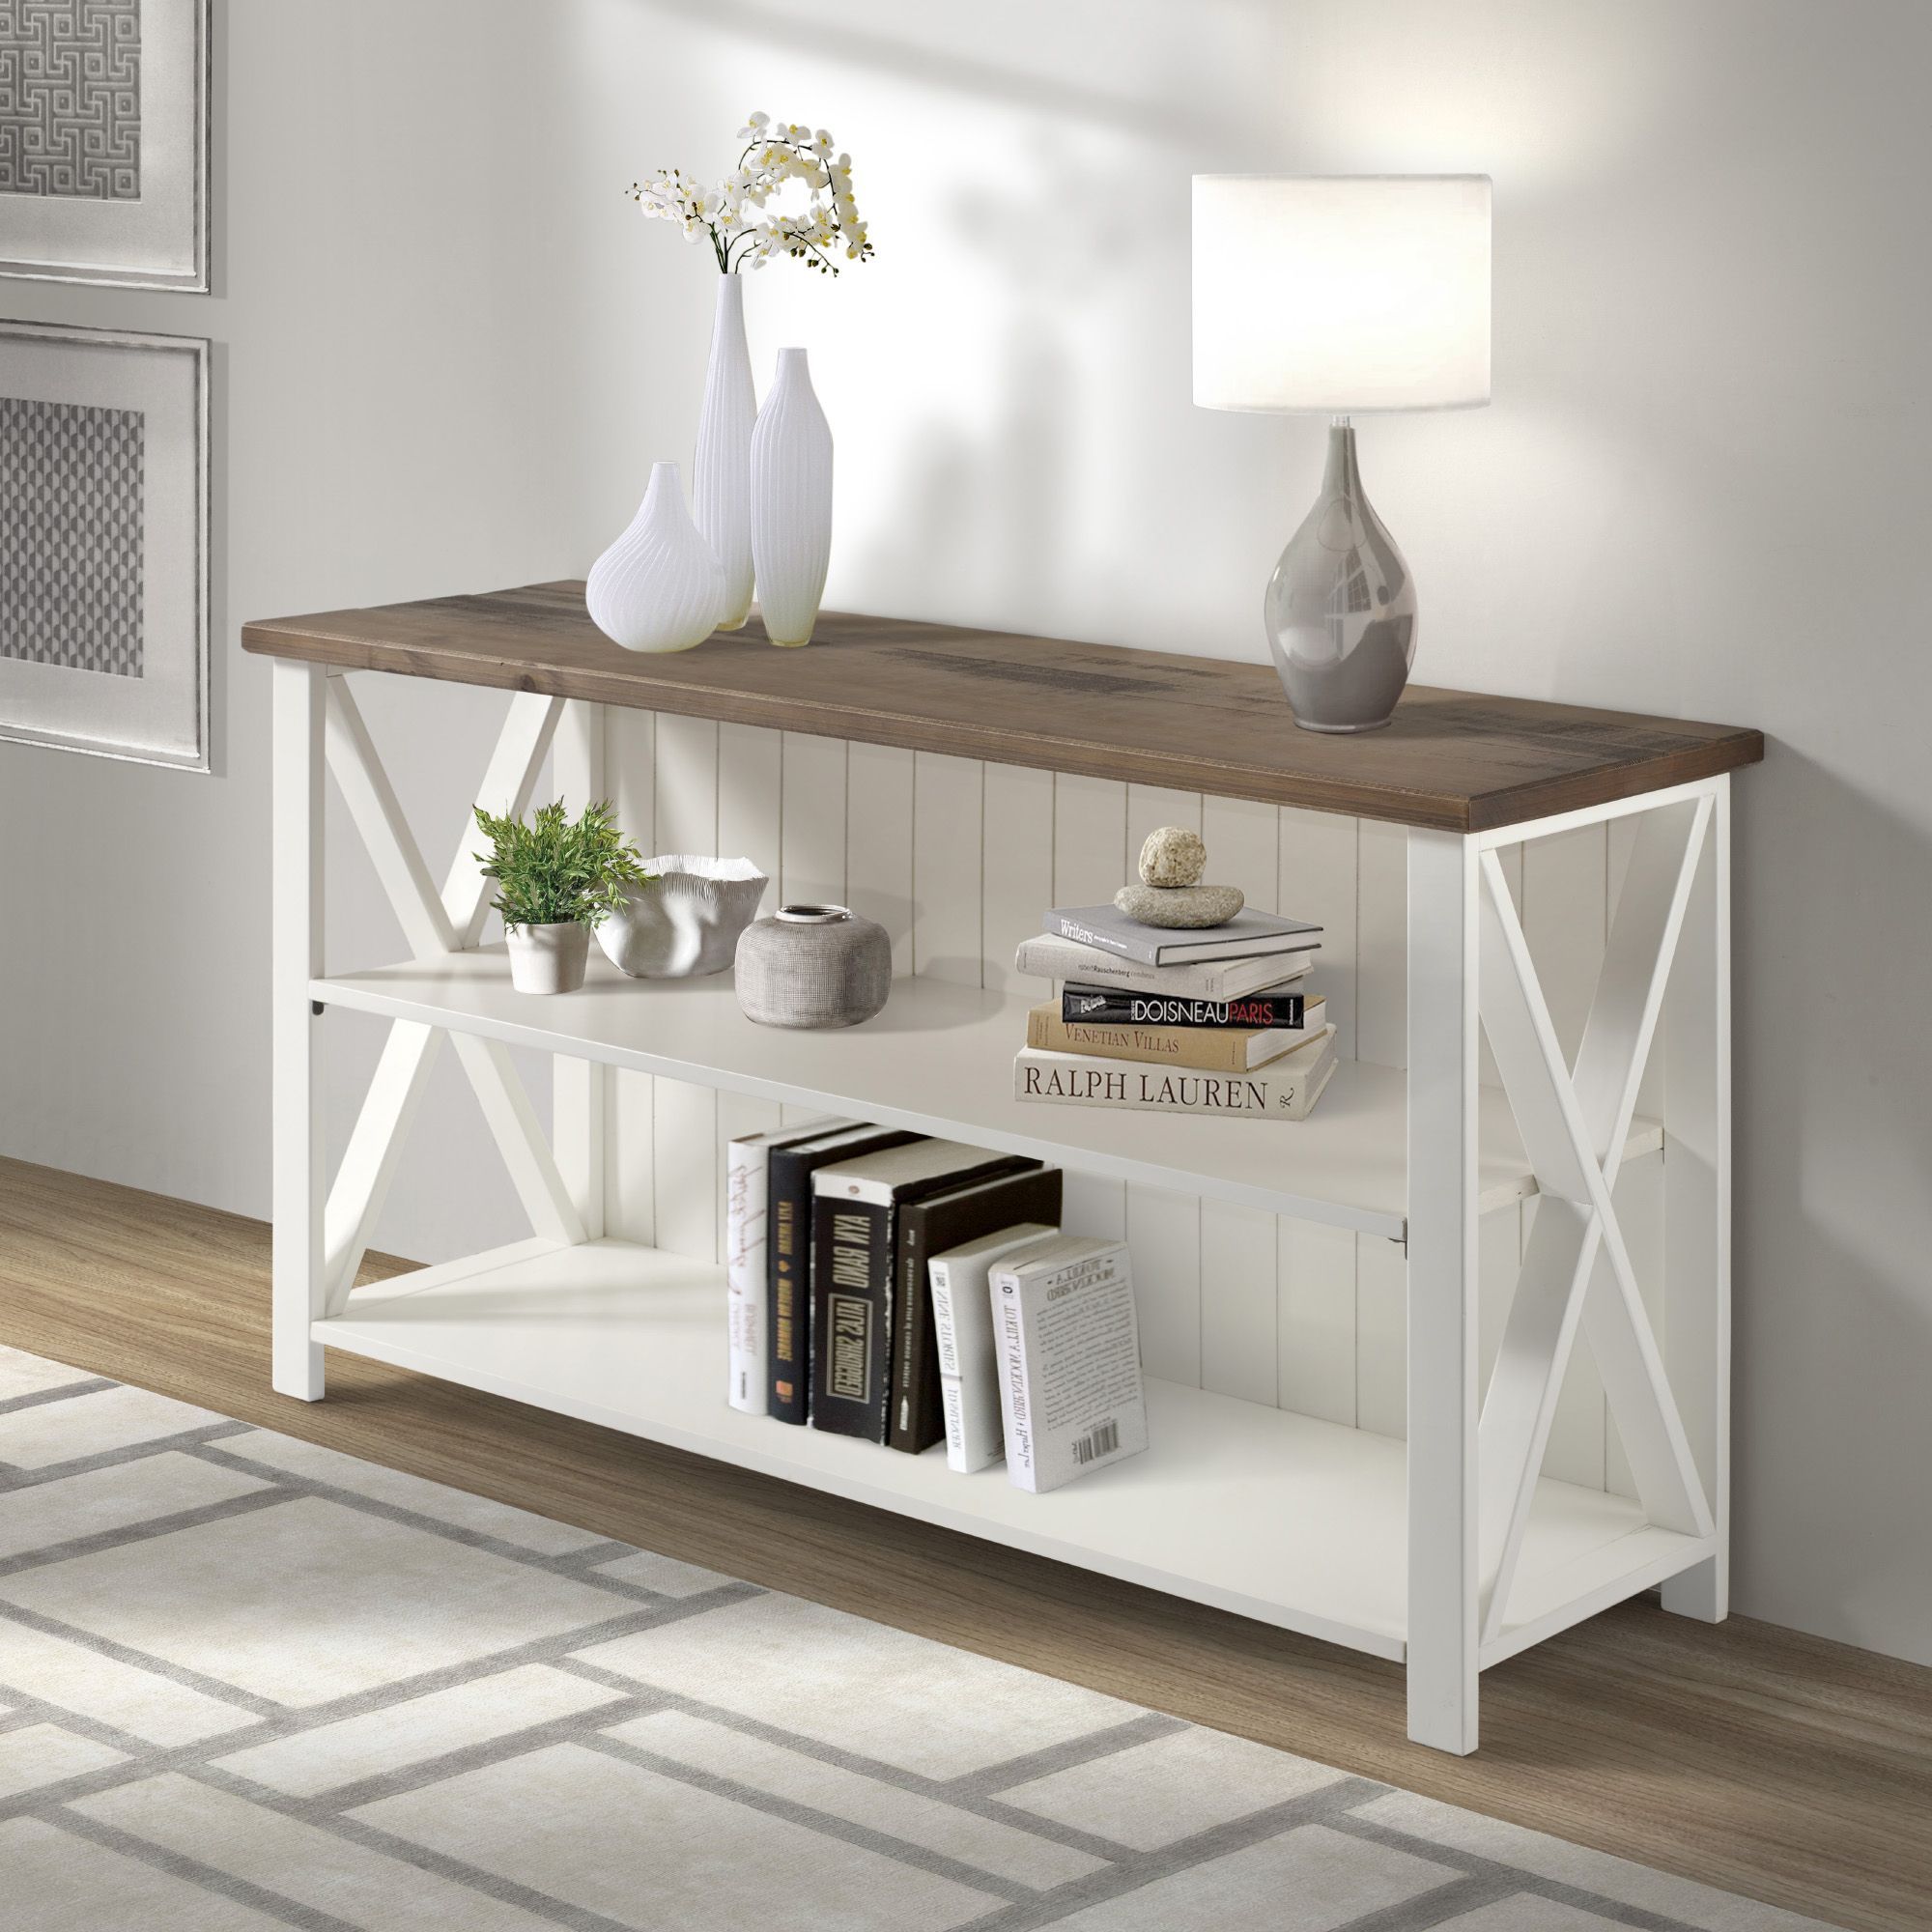 Woven Paths Solid Wood Storage Console Table, White Intended For Woven Paths Farmhouse Sliding Barn Door Tv Stands With Multiple Finishes (View 6 of 14)